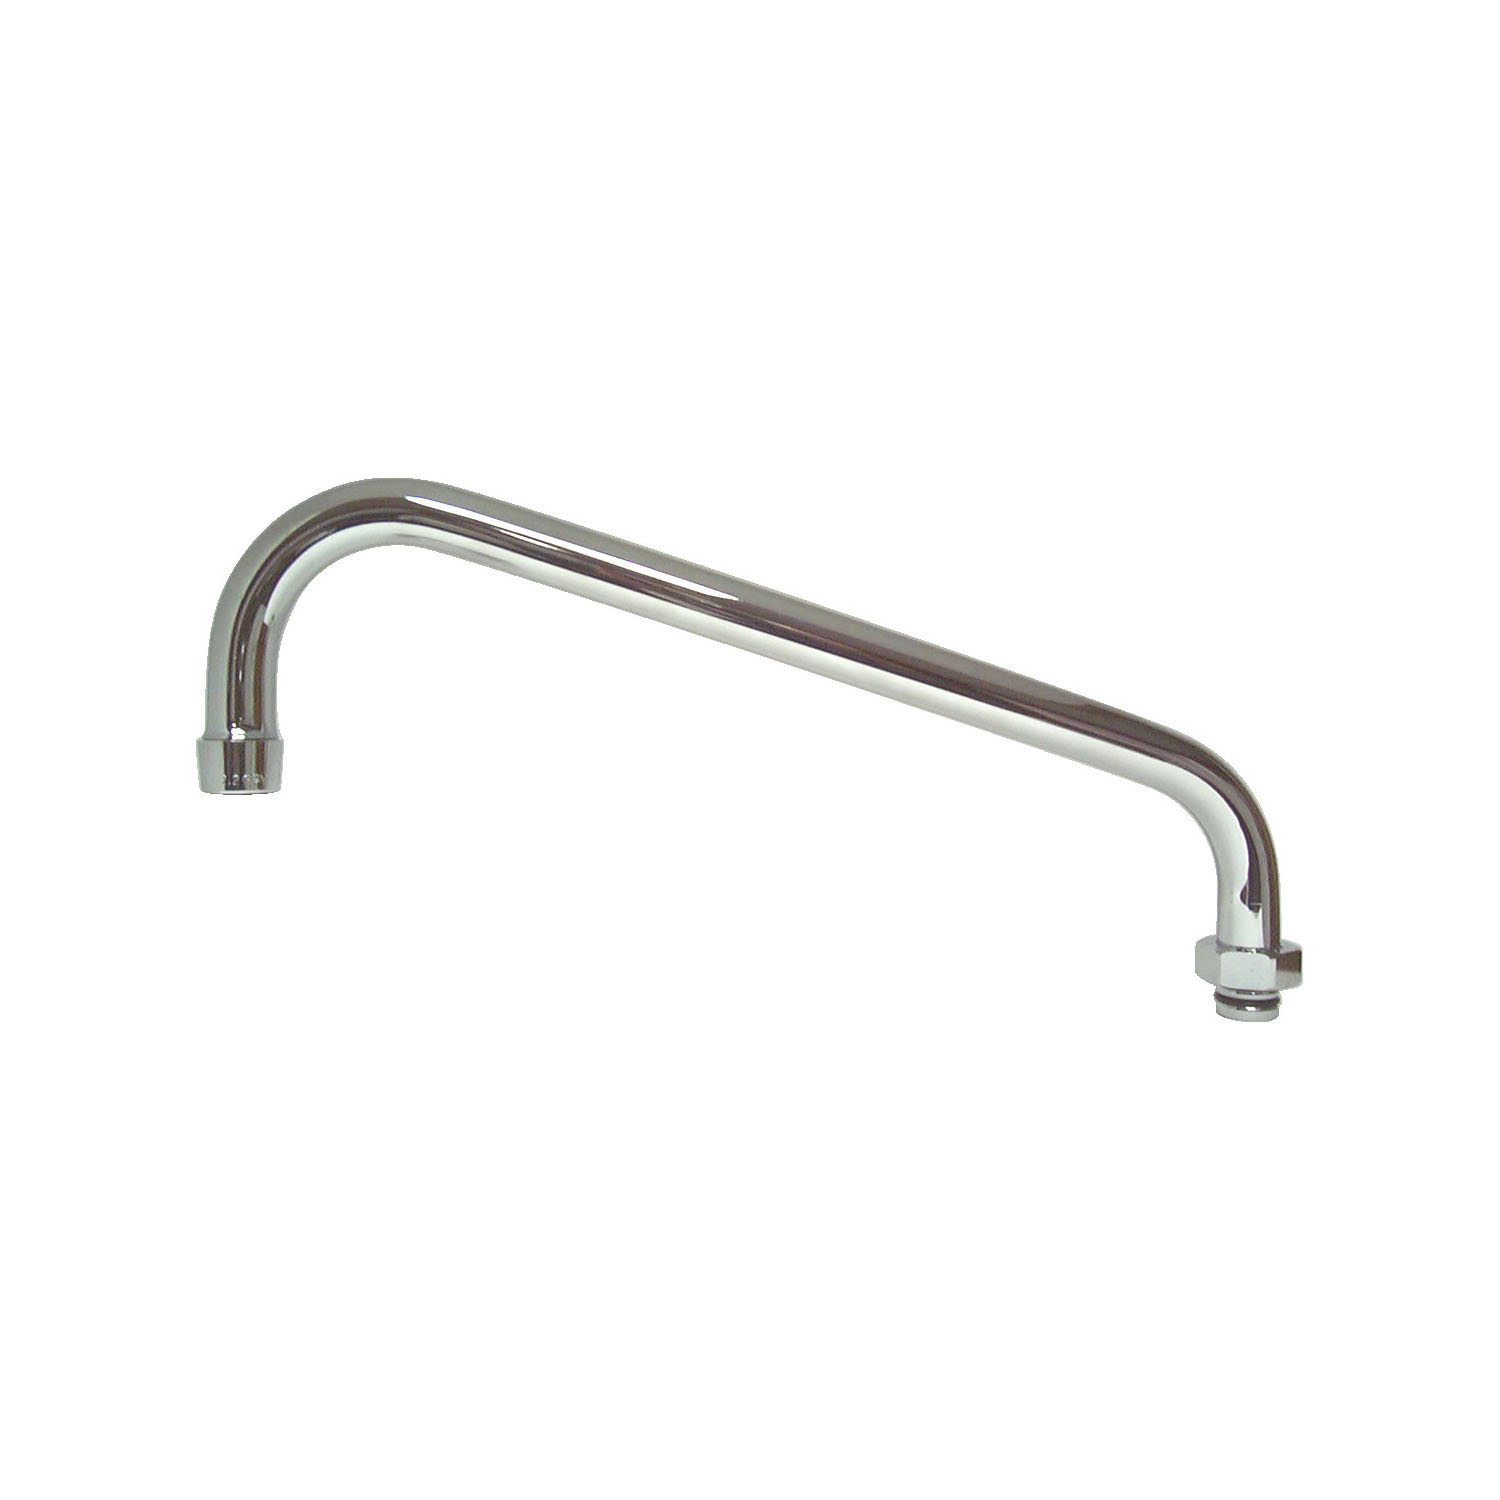 Fisher 54410 Swing Spout With Aerator, 1/2 in, 12 in Spout Reach x 2 in H Spout, 2.2 gpm, Stainless Steel, Domestic